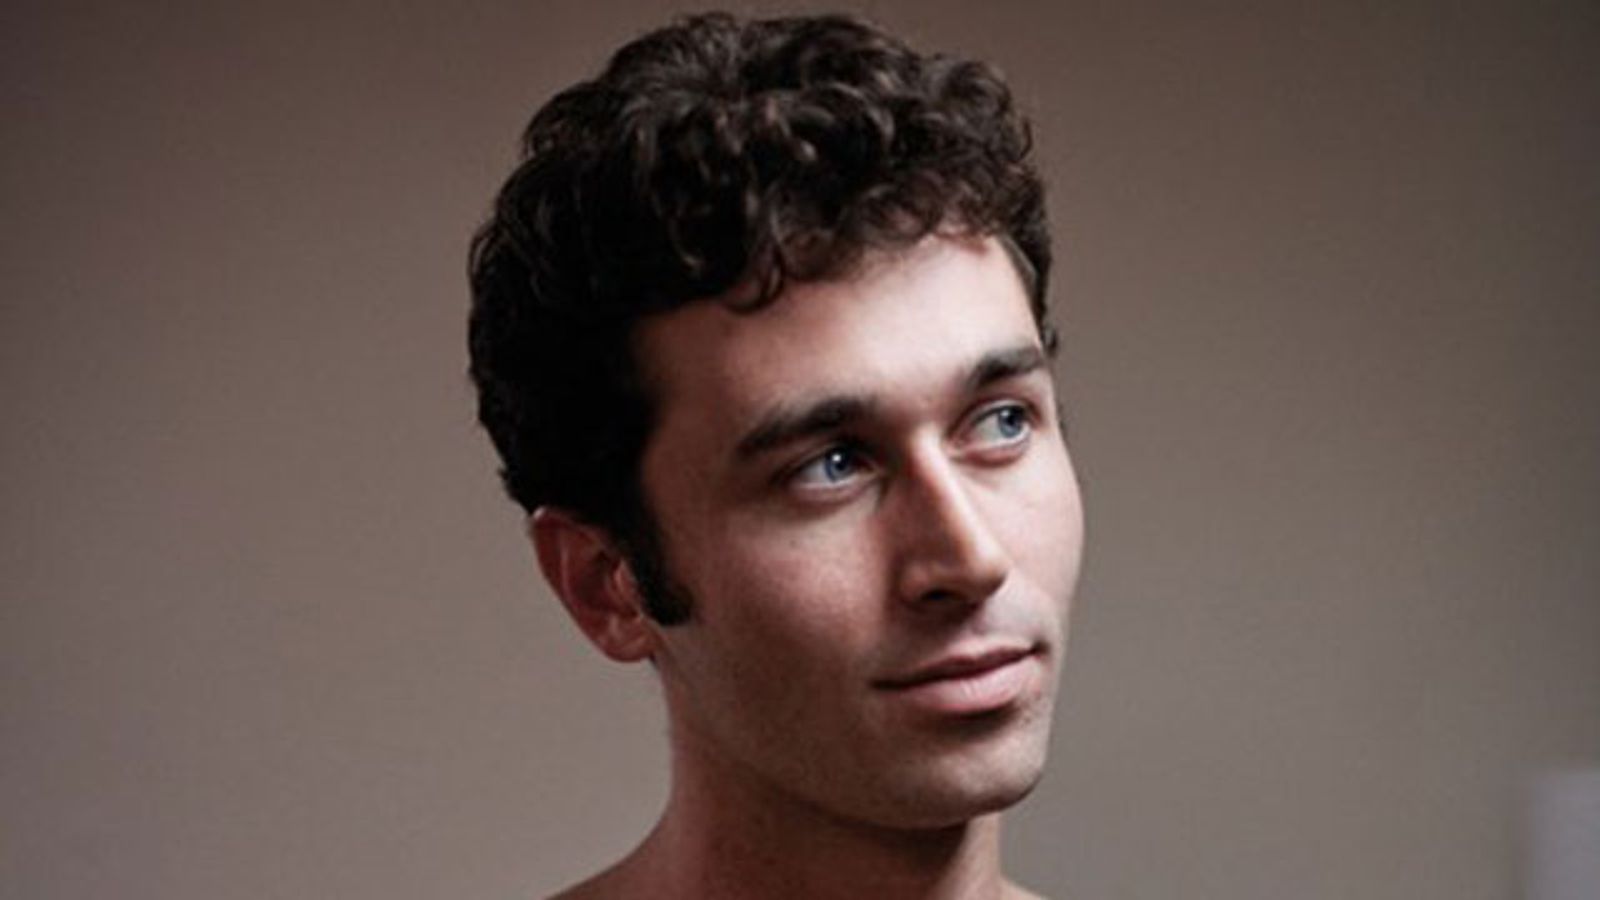 James Deen is NightMoves' Best Male Performer for 2014